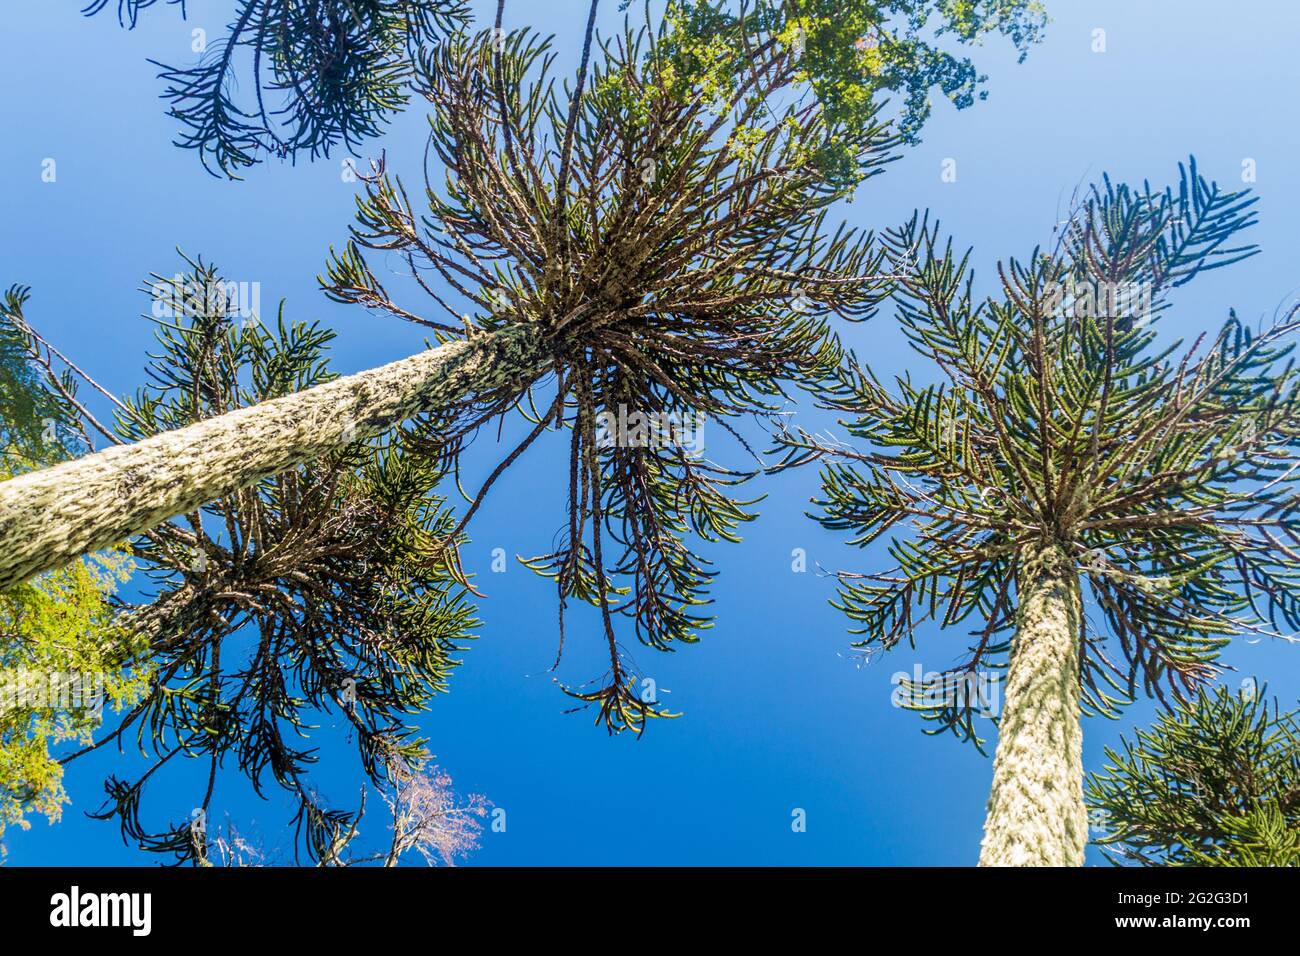 Araucaria forest in National Park Herquehue, Chile. The tree is called Araucaria araucana (commonly: monkey puzzle tree, monkey tail tree, Chilean pin Stock Photo